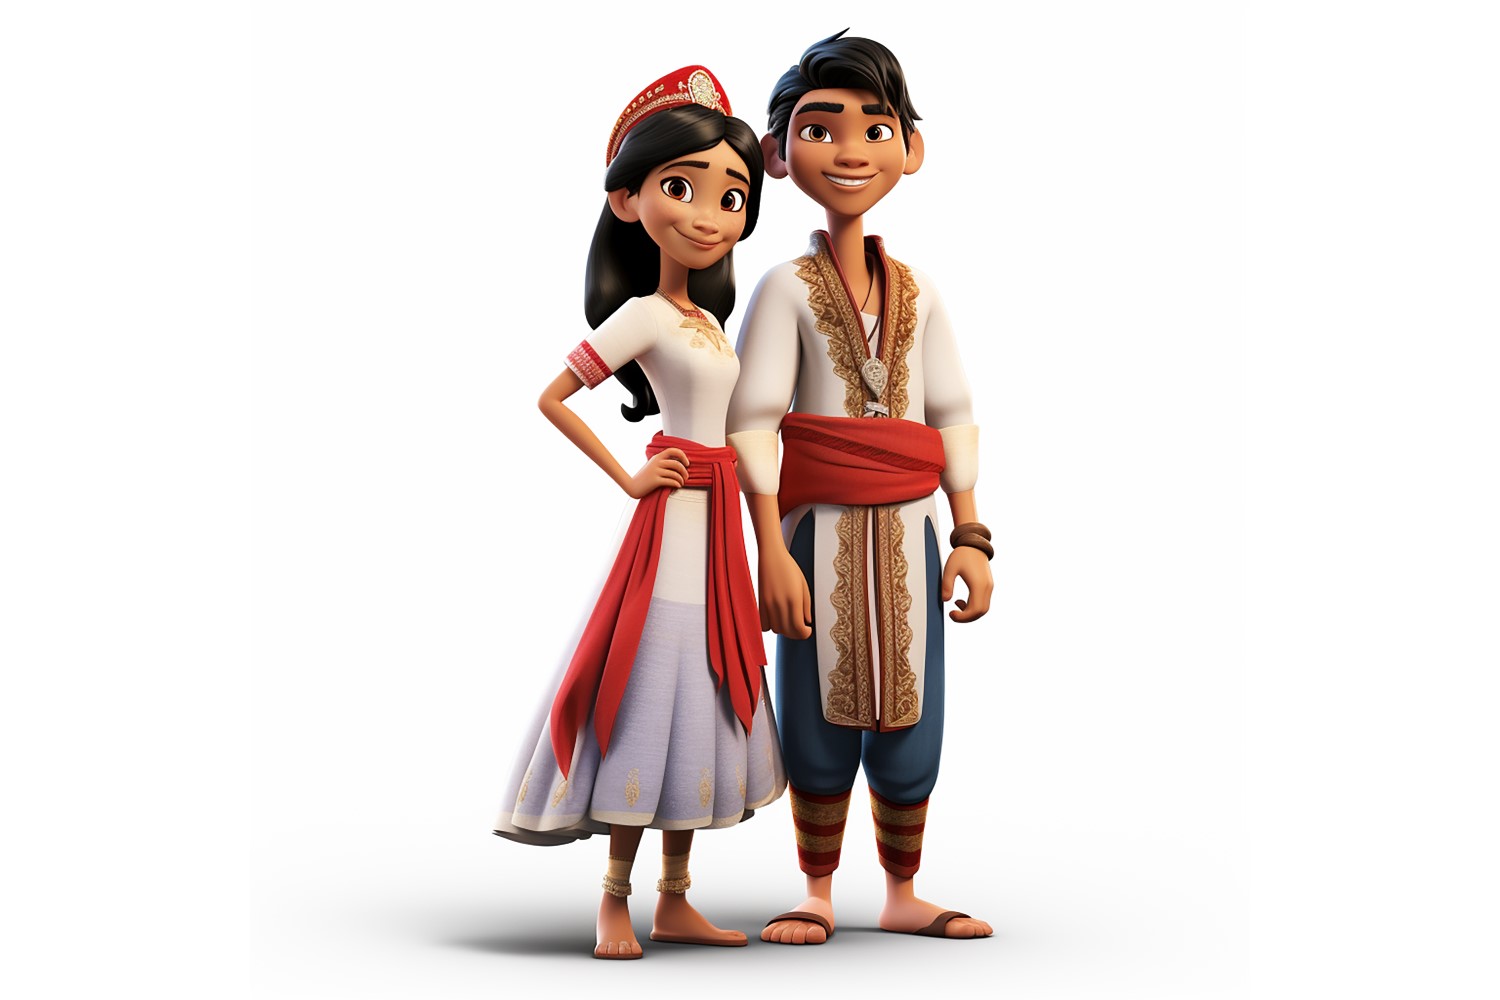 Boy & Girl couple world Races in traditional cultural dress 53